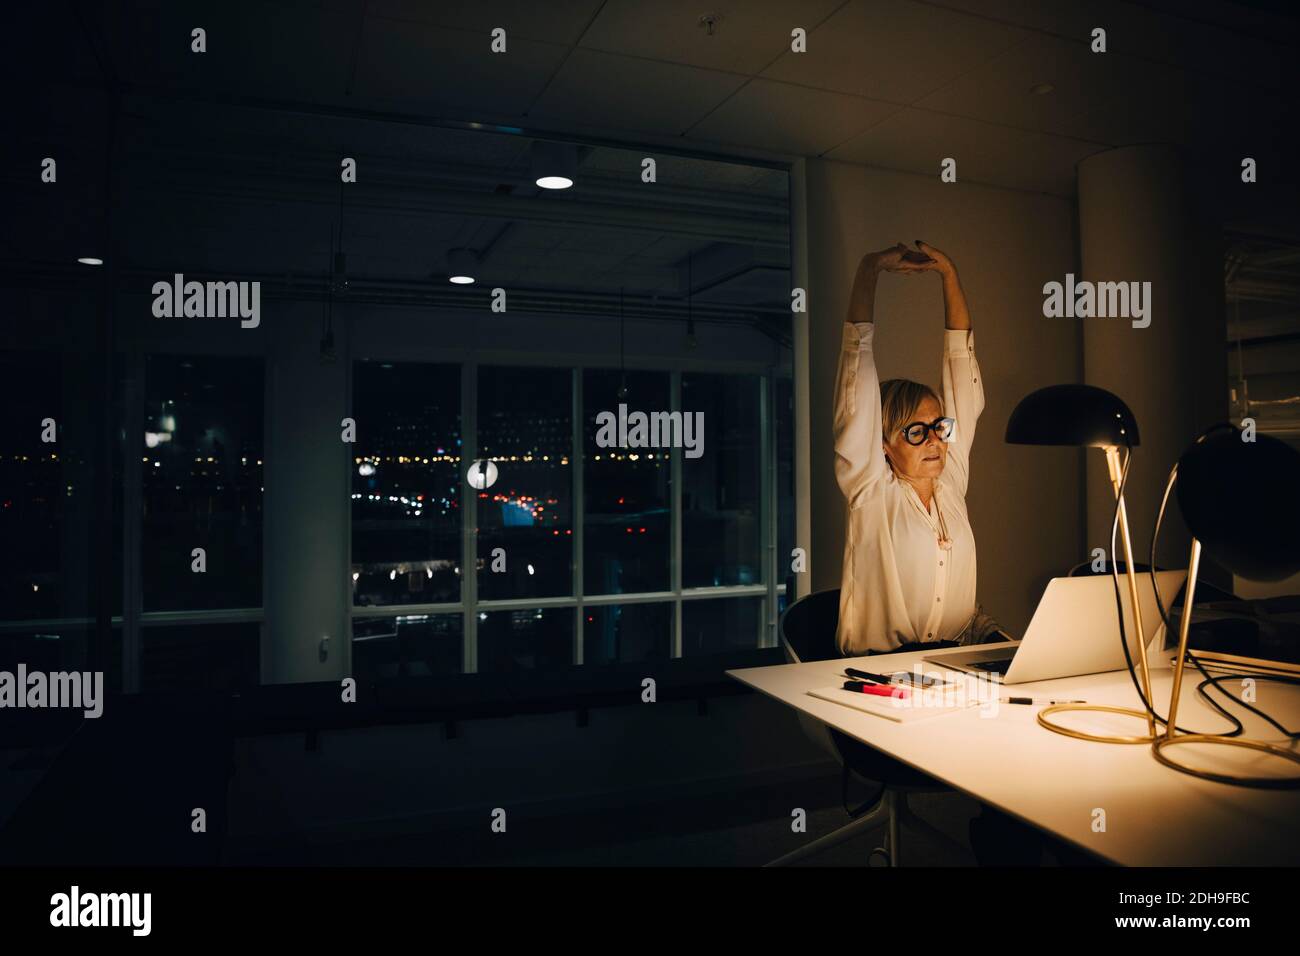 Exhausted businesswoman stretching with arms raised while working late in illuminated coworking office Stock Photo